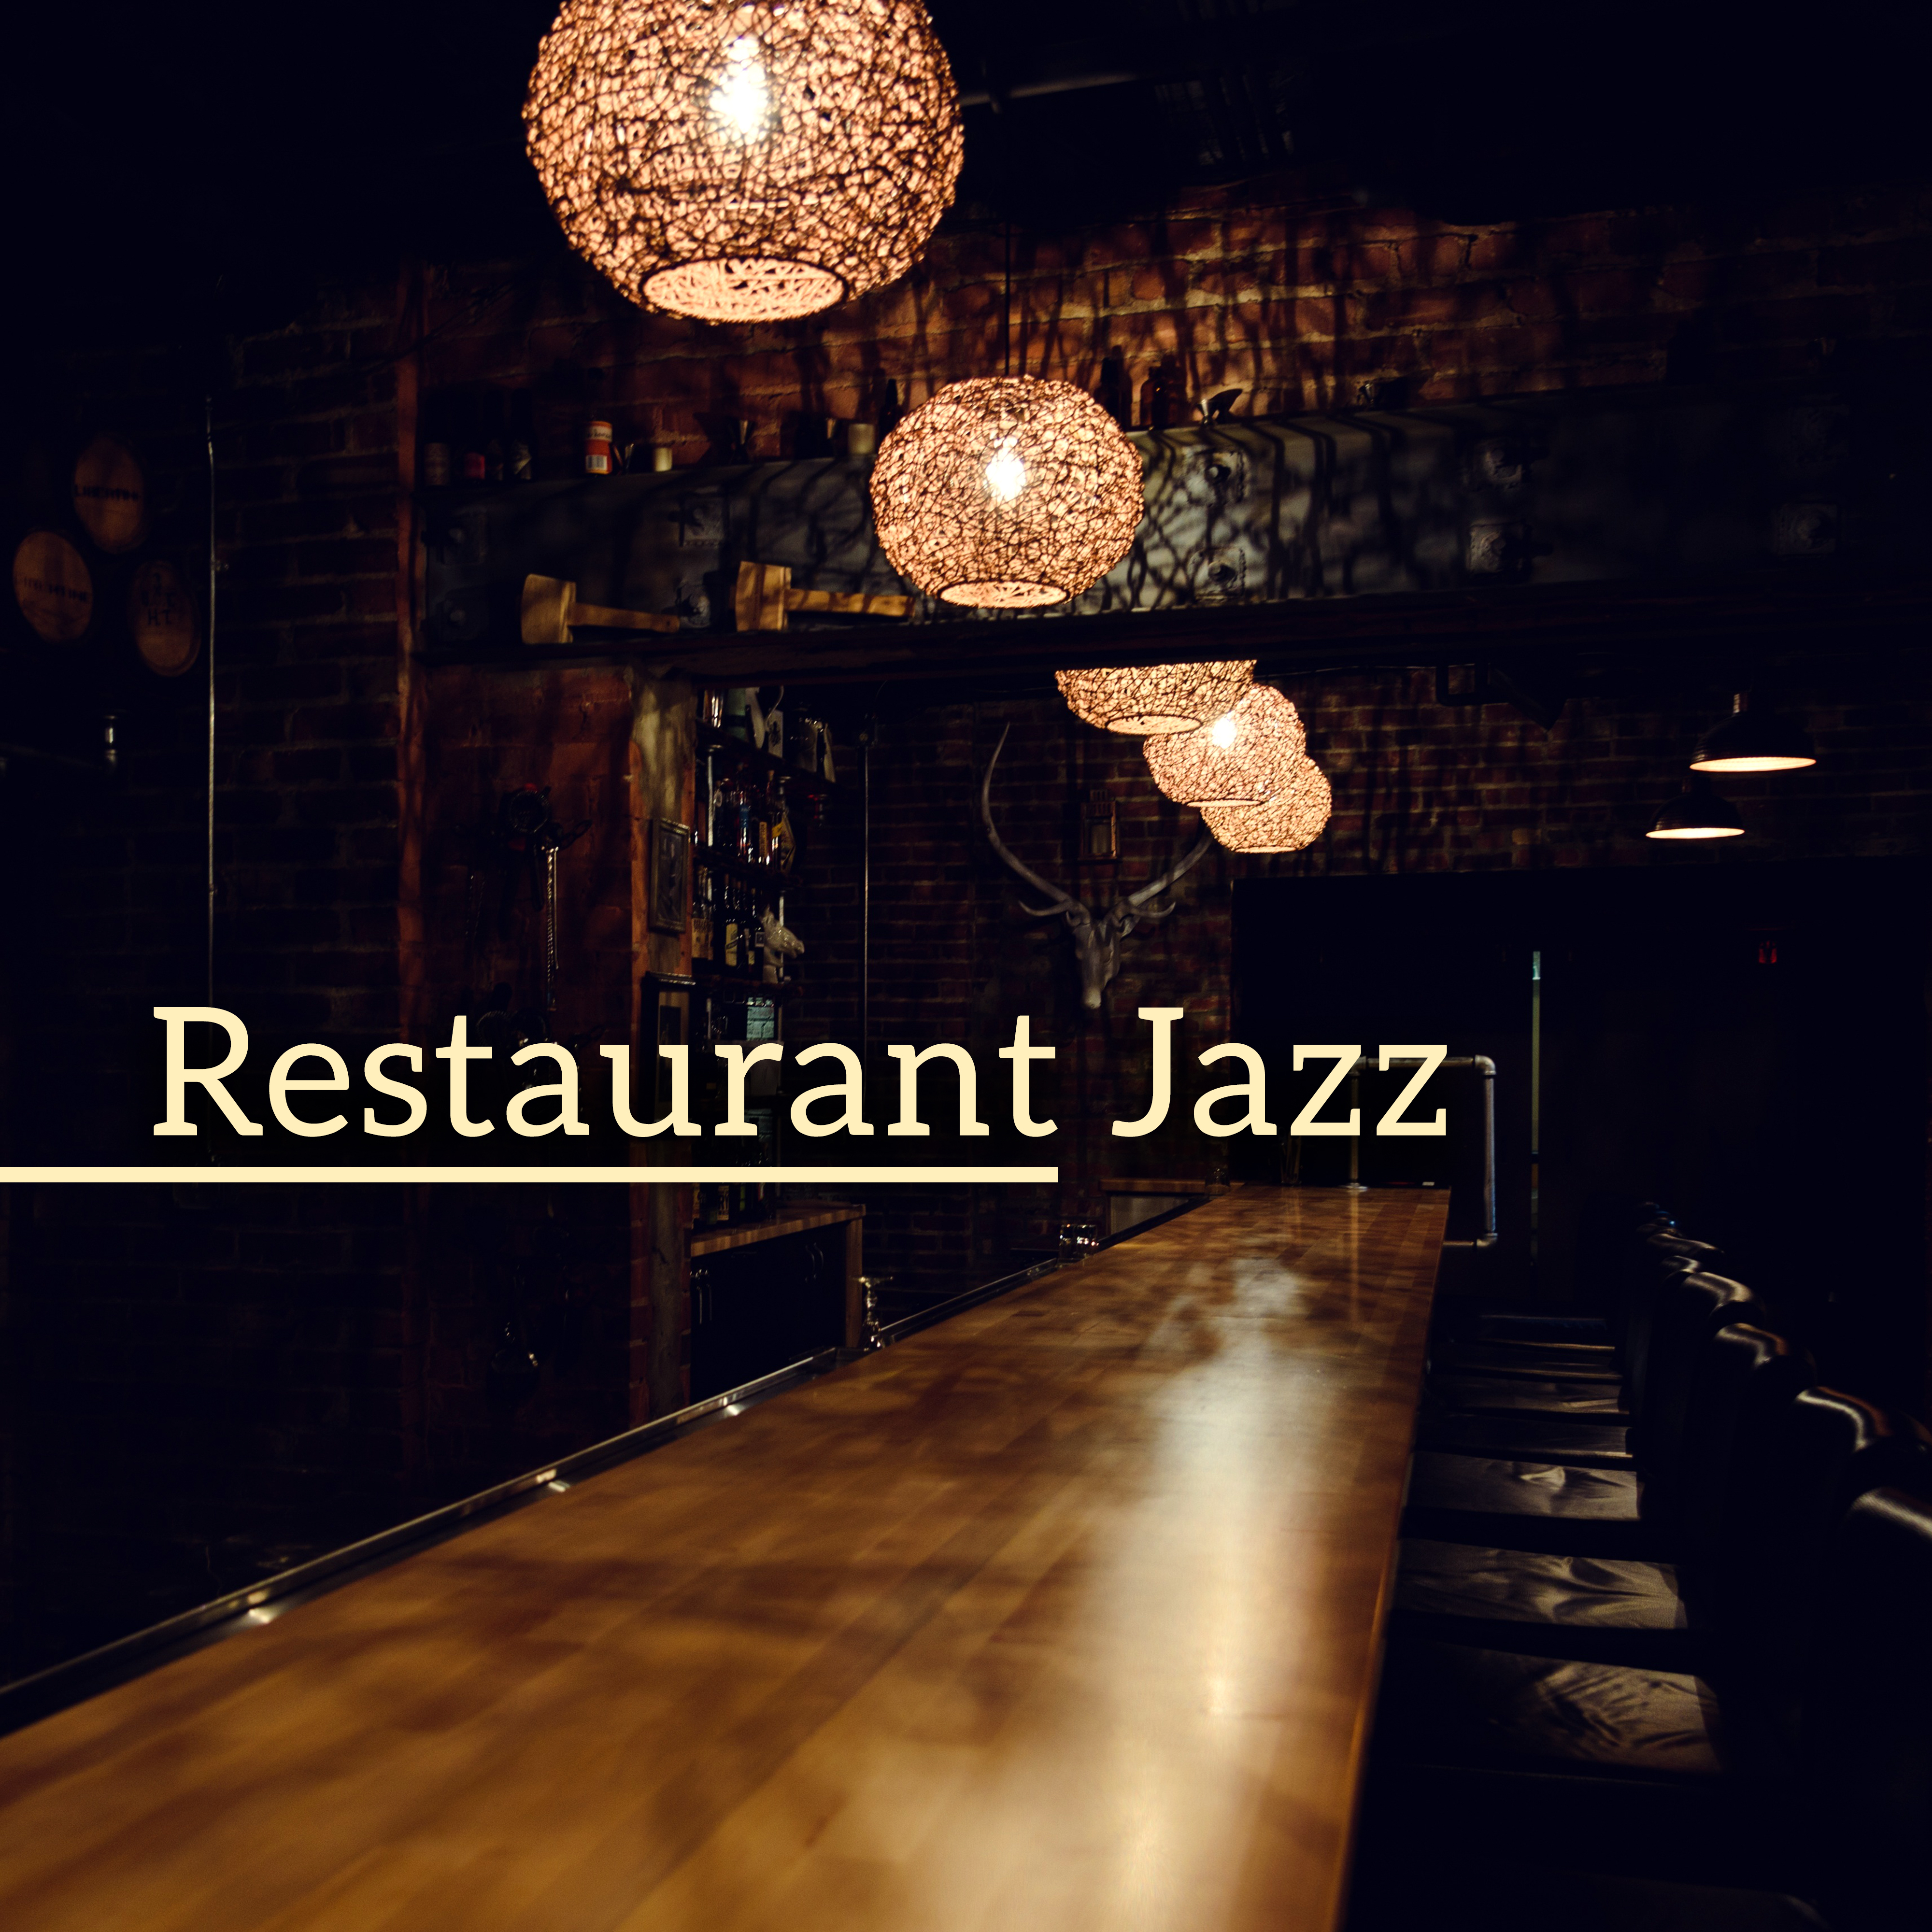 Restaurant Jazz – Piano Bar, Instrumental Background for Dinner Party, Mellow Jazz Cafe, Perfect Relax